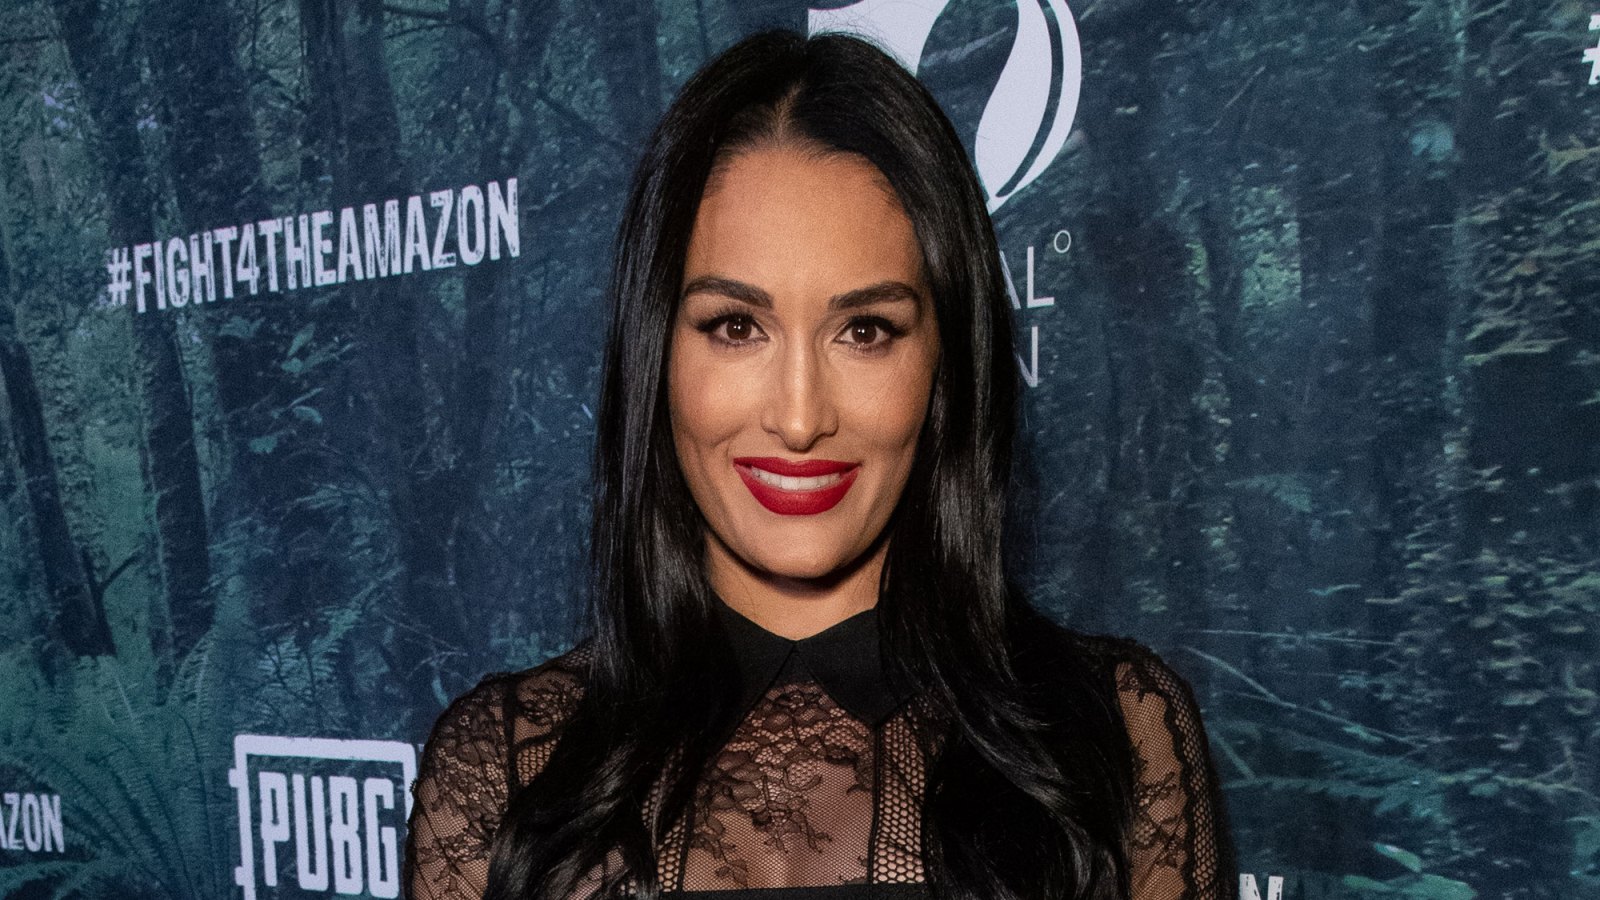 Nikki Bella Shows Off Pregnancy Curves I’m Fitted Black Dress: ‘My Bump Has Gotten So Much Bigger’